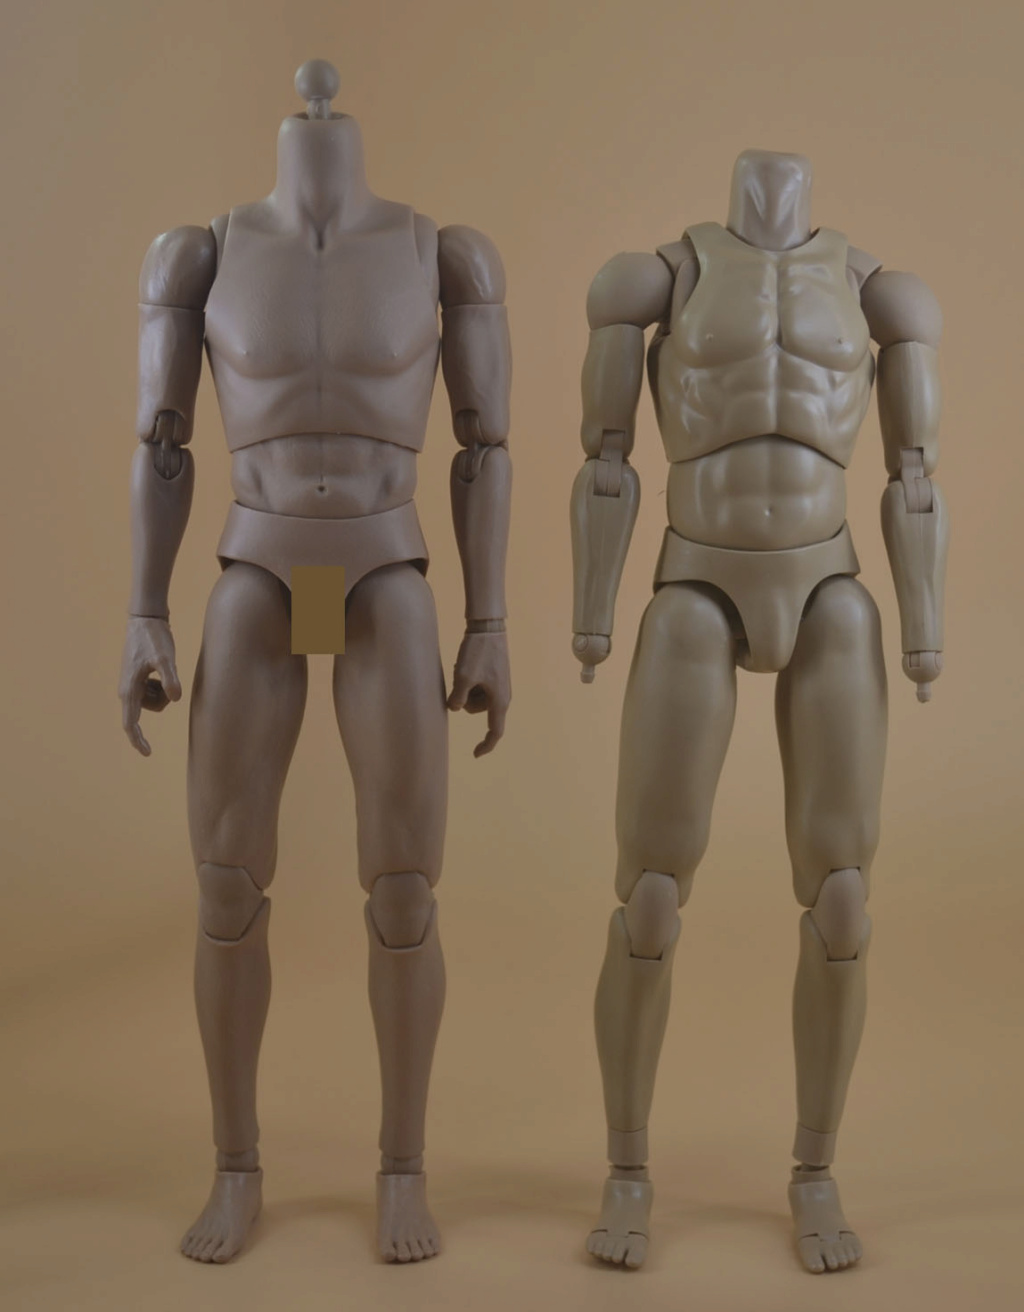 NEW PRODUCT: COOMODEL: 1/6 MB001 standard male body, MB002 tall male body, MB003 muscle male body, MB004 tall muscle body _dsc3738